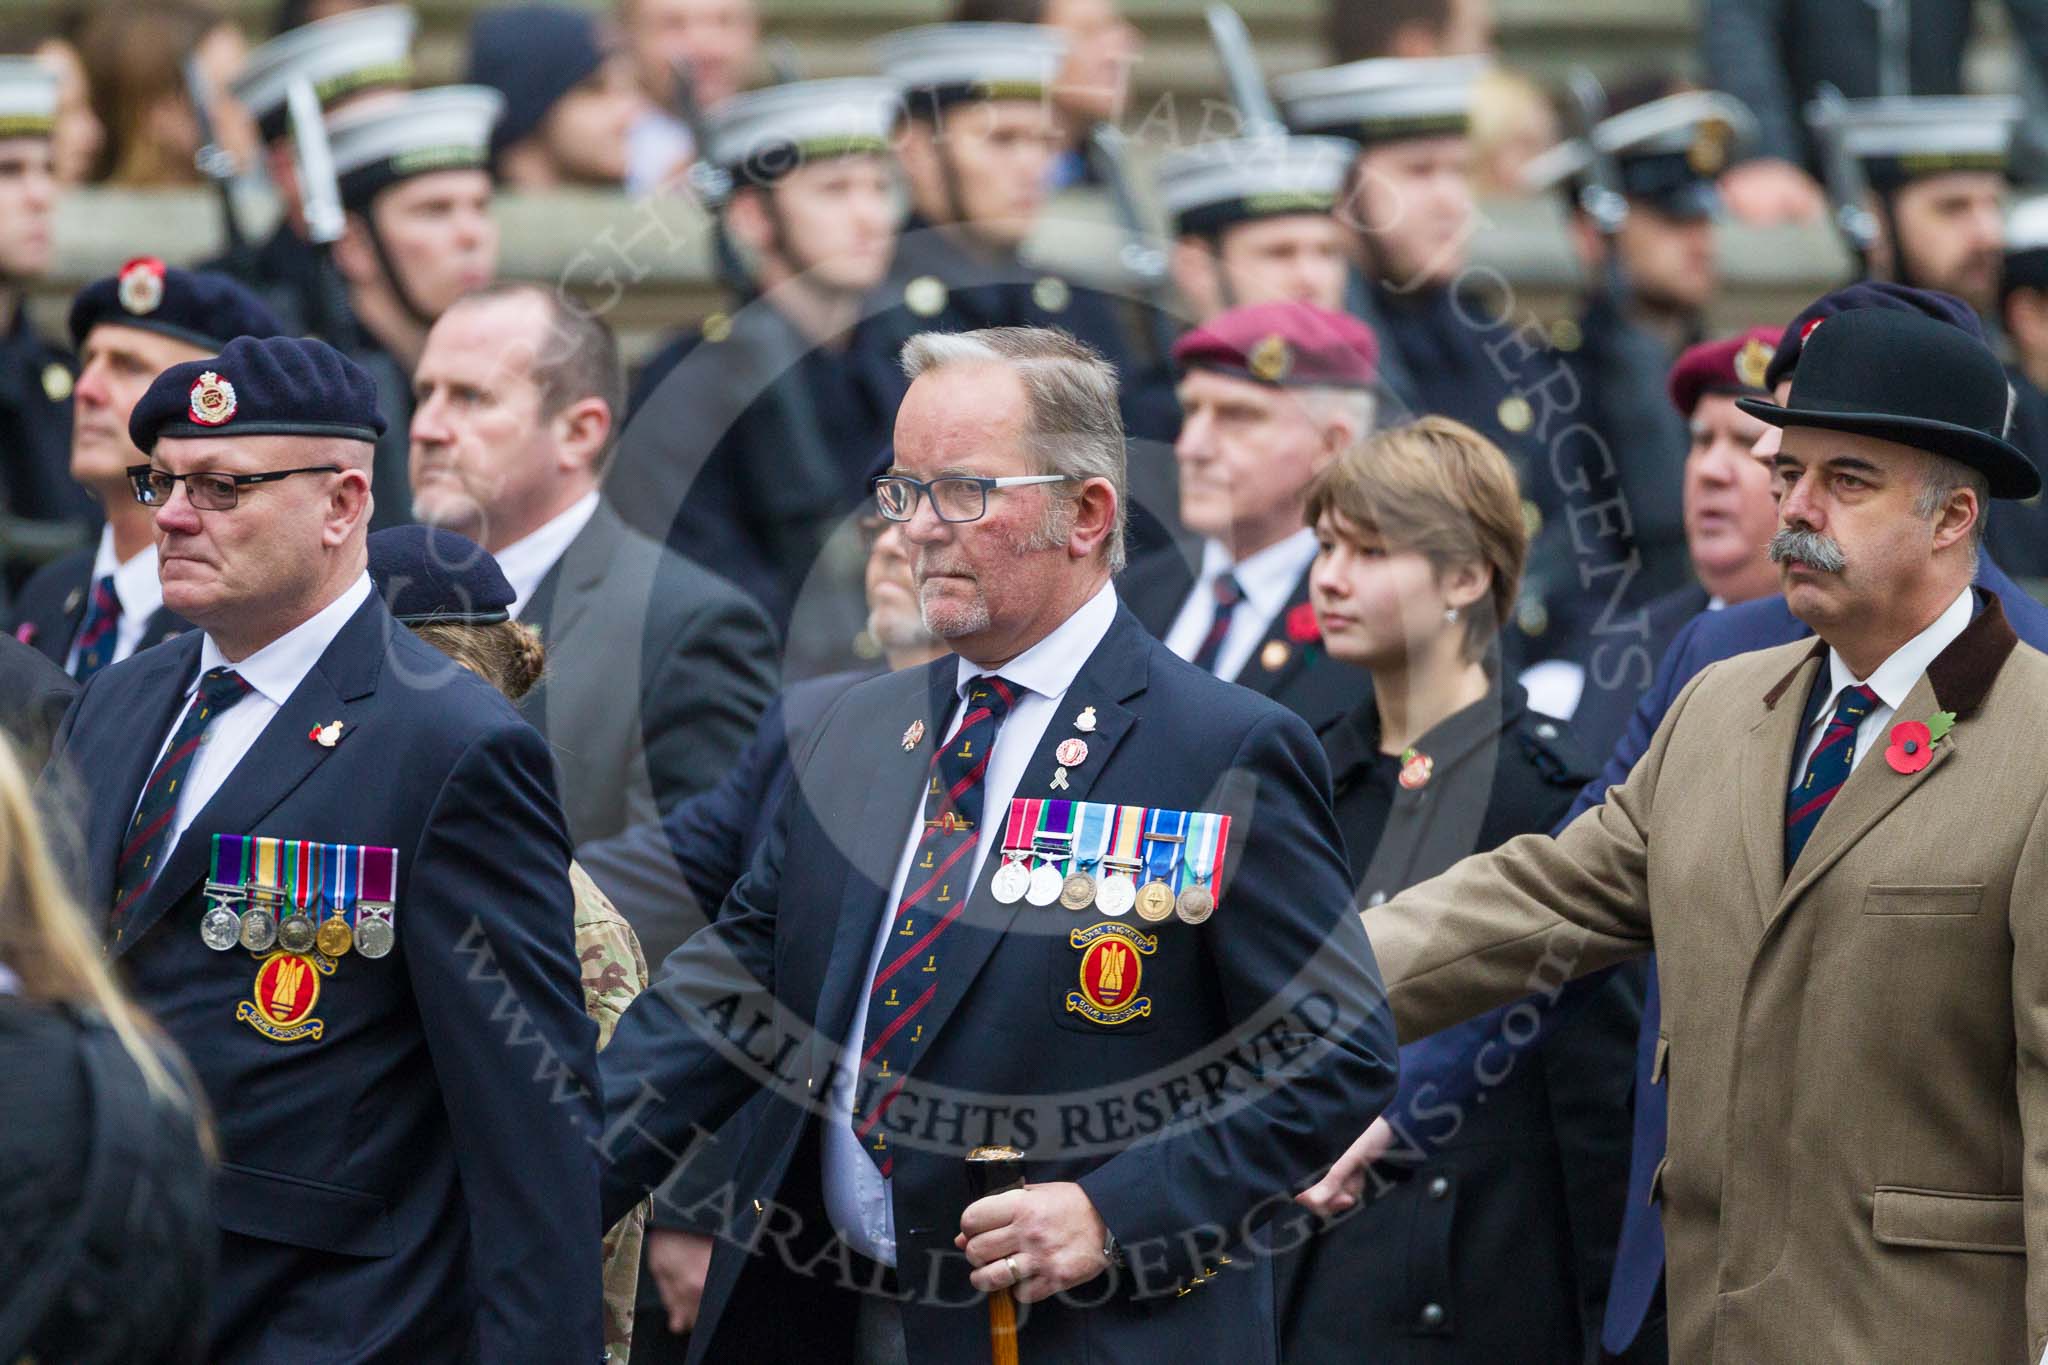 Remembrance Sunday at the Cenotaph 2015: Group B6, Royal Engineers Bomb Disposal Association (Anniversary).
Cenotaph, Whitehall, London SW1,
London,
Greater London,
United Kingdom,
on 08 November 2015 at 11:37, image #53